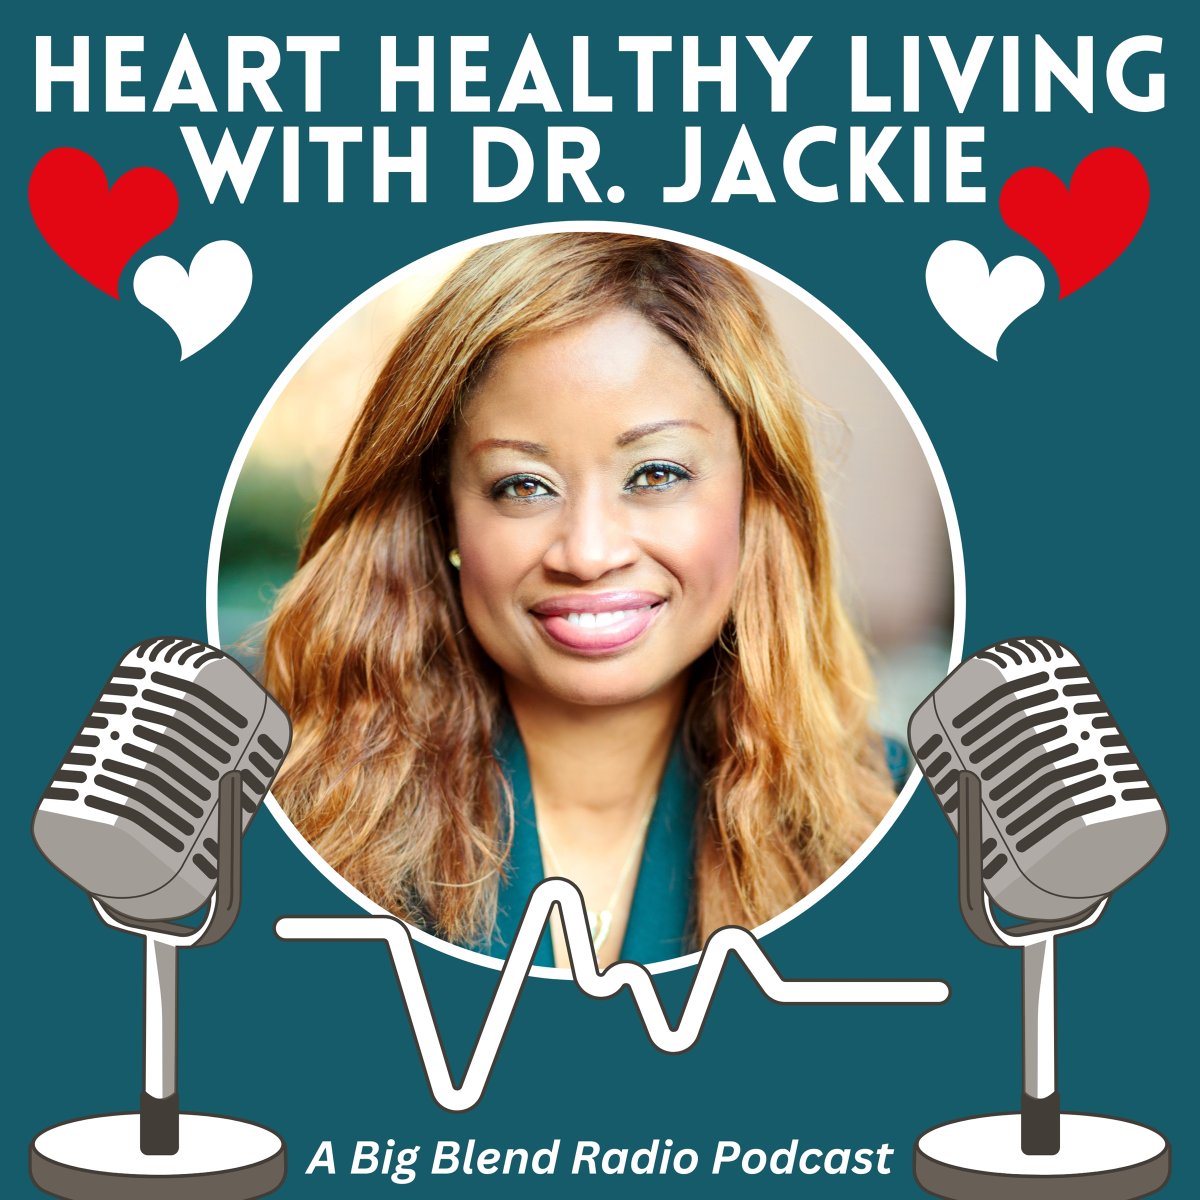 We're talking Women's Heart Health on #BigBlendRadio's new 'Heart Healthy Living with Dr. Jackie' Podcast. Listen: …arthealthyliving-drjackie.podbean.com #HealthPodcast #WomensHealth #HeartHealth